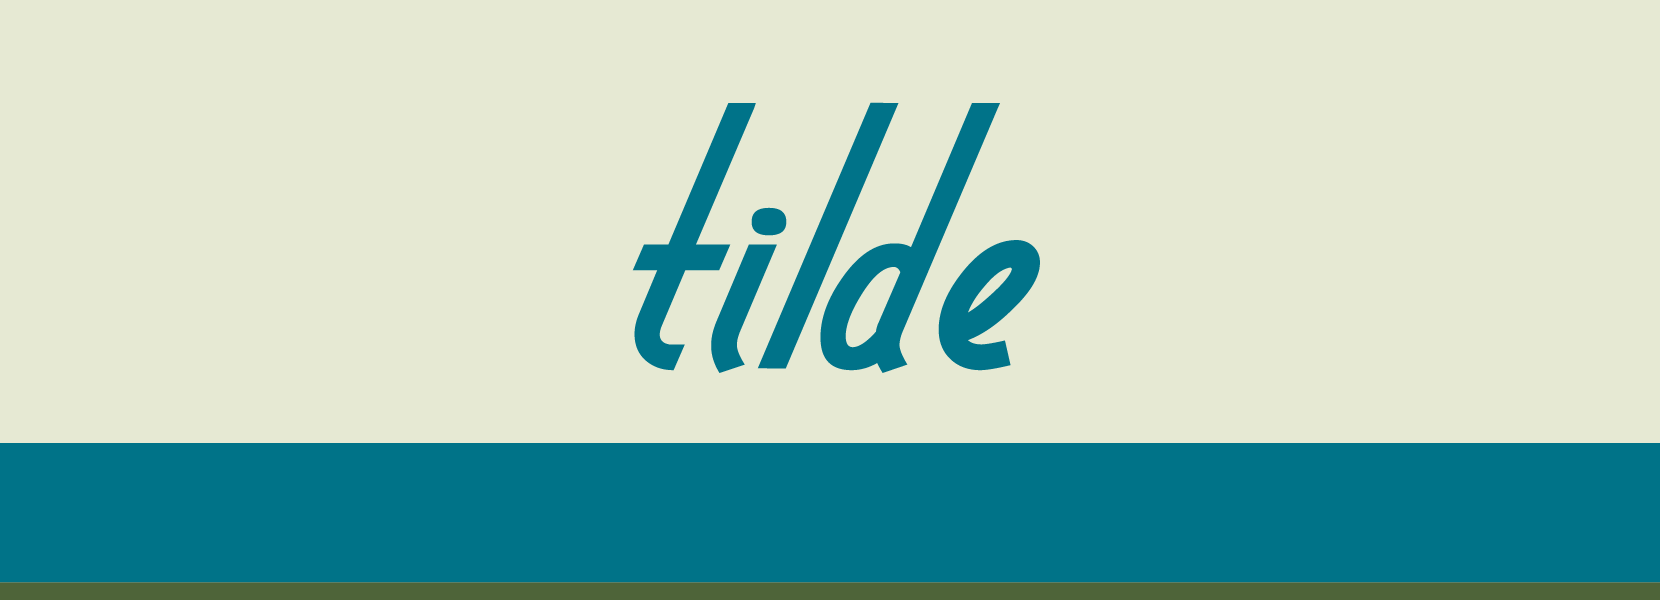 how to make tilde in word 2016